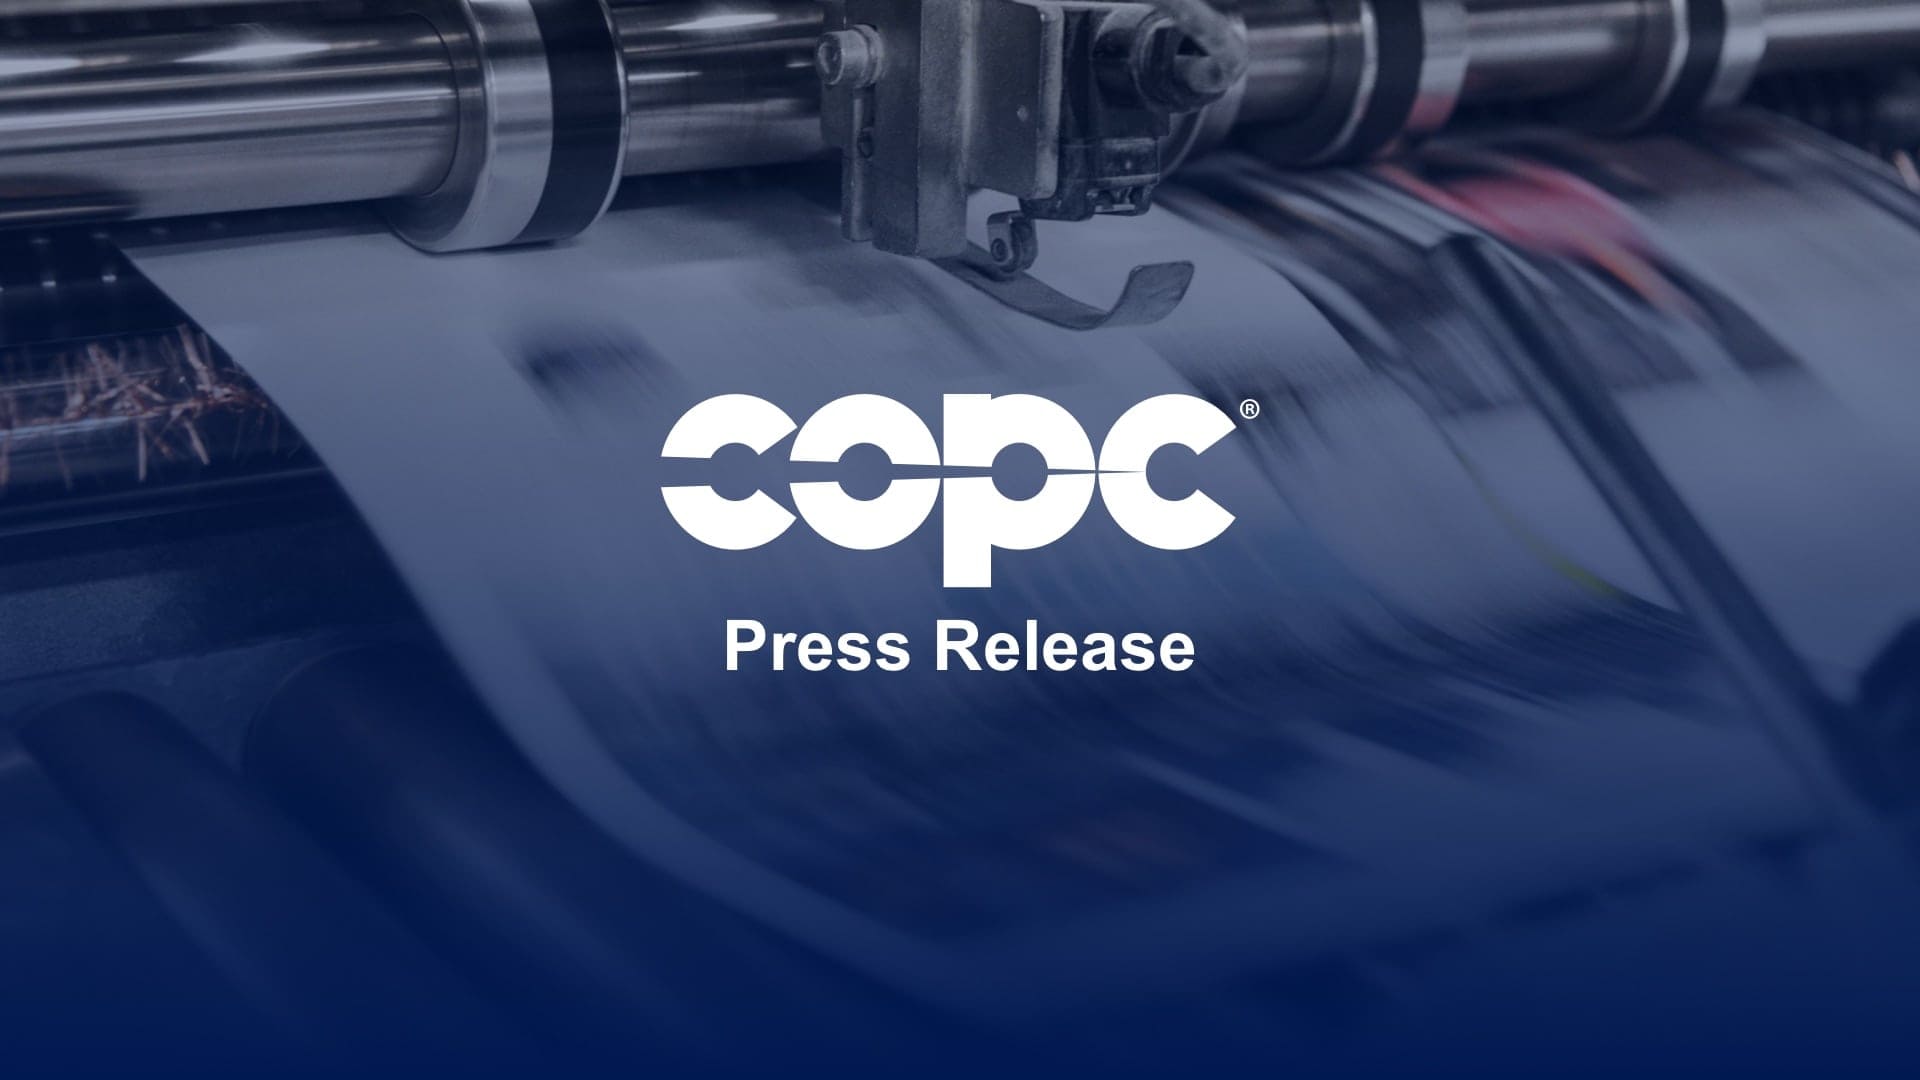 SBI Card, Customer Services Division, Achieves COPC Inc. Process Certification thumbnail Image 